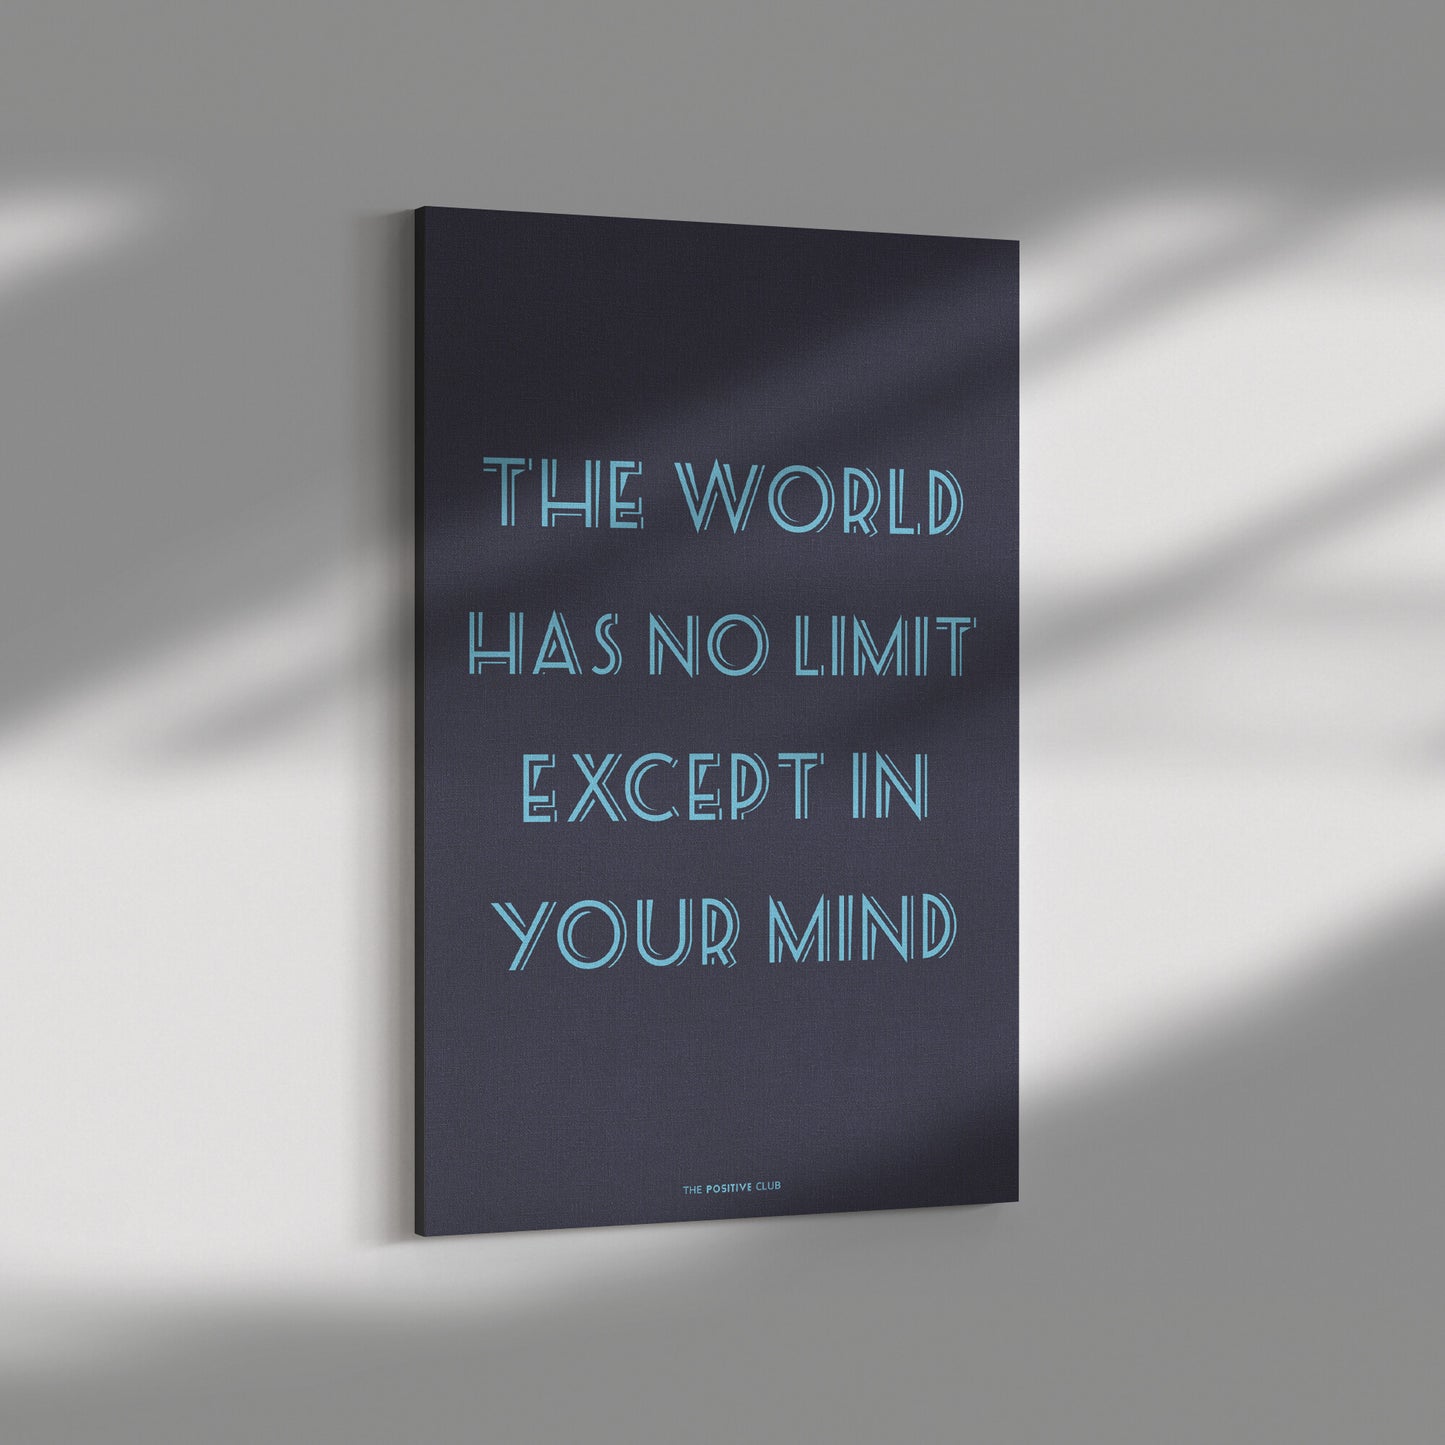 THE WORLD HAS NO LIMIT EXCEPT IN YOUR MIND